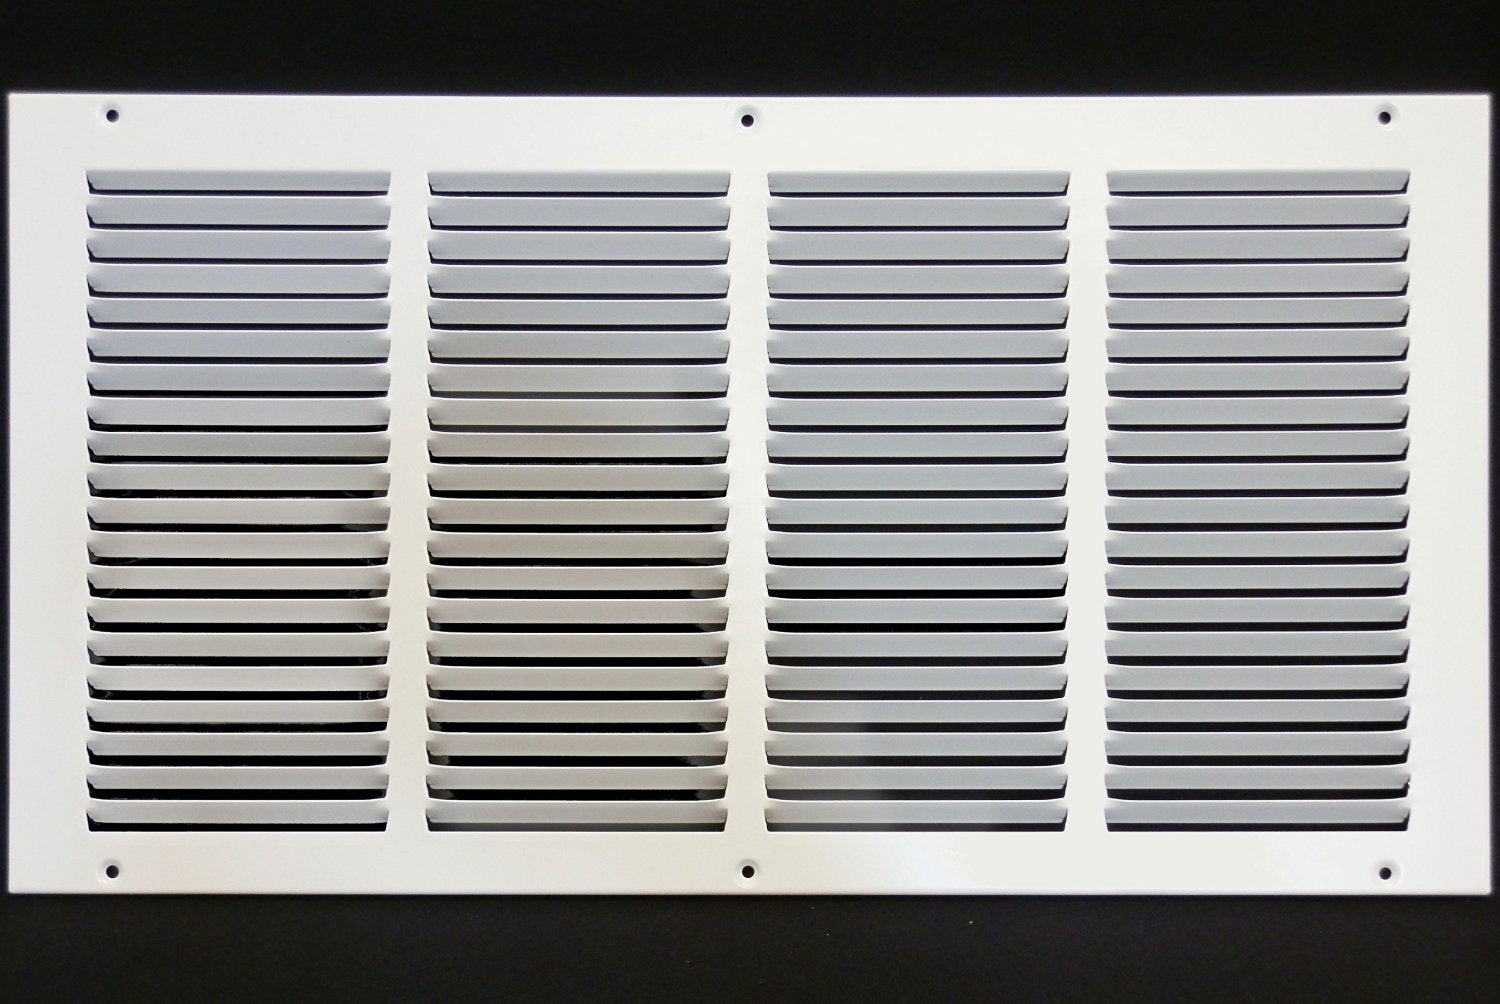 18" X 10" Air Vent Return Grilles - Sidewall and Ceiling - Steel